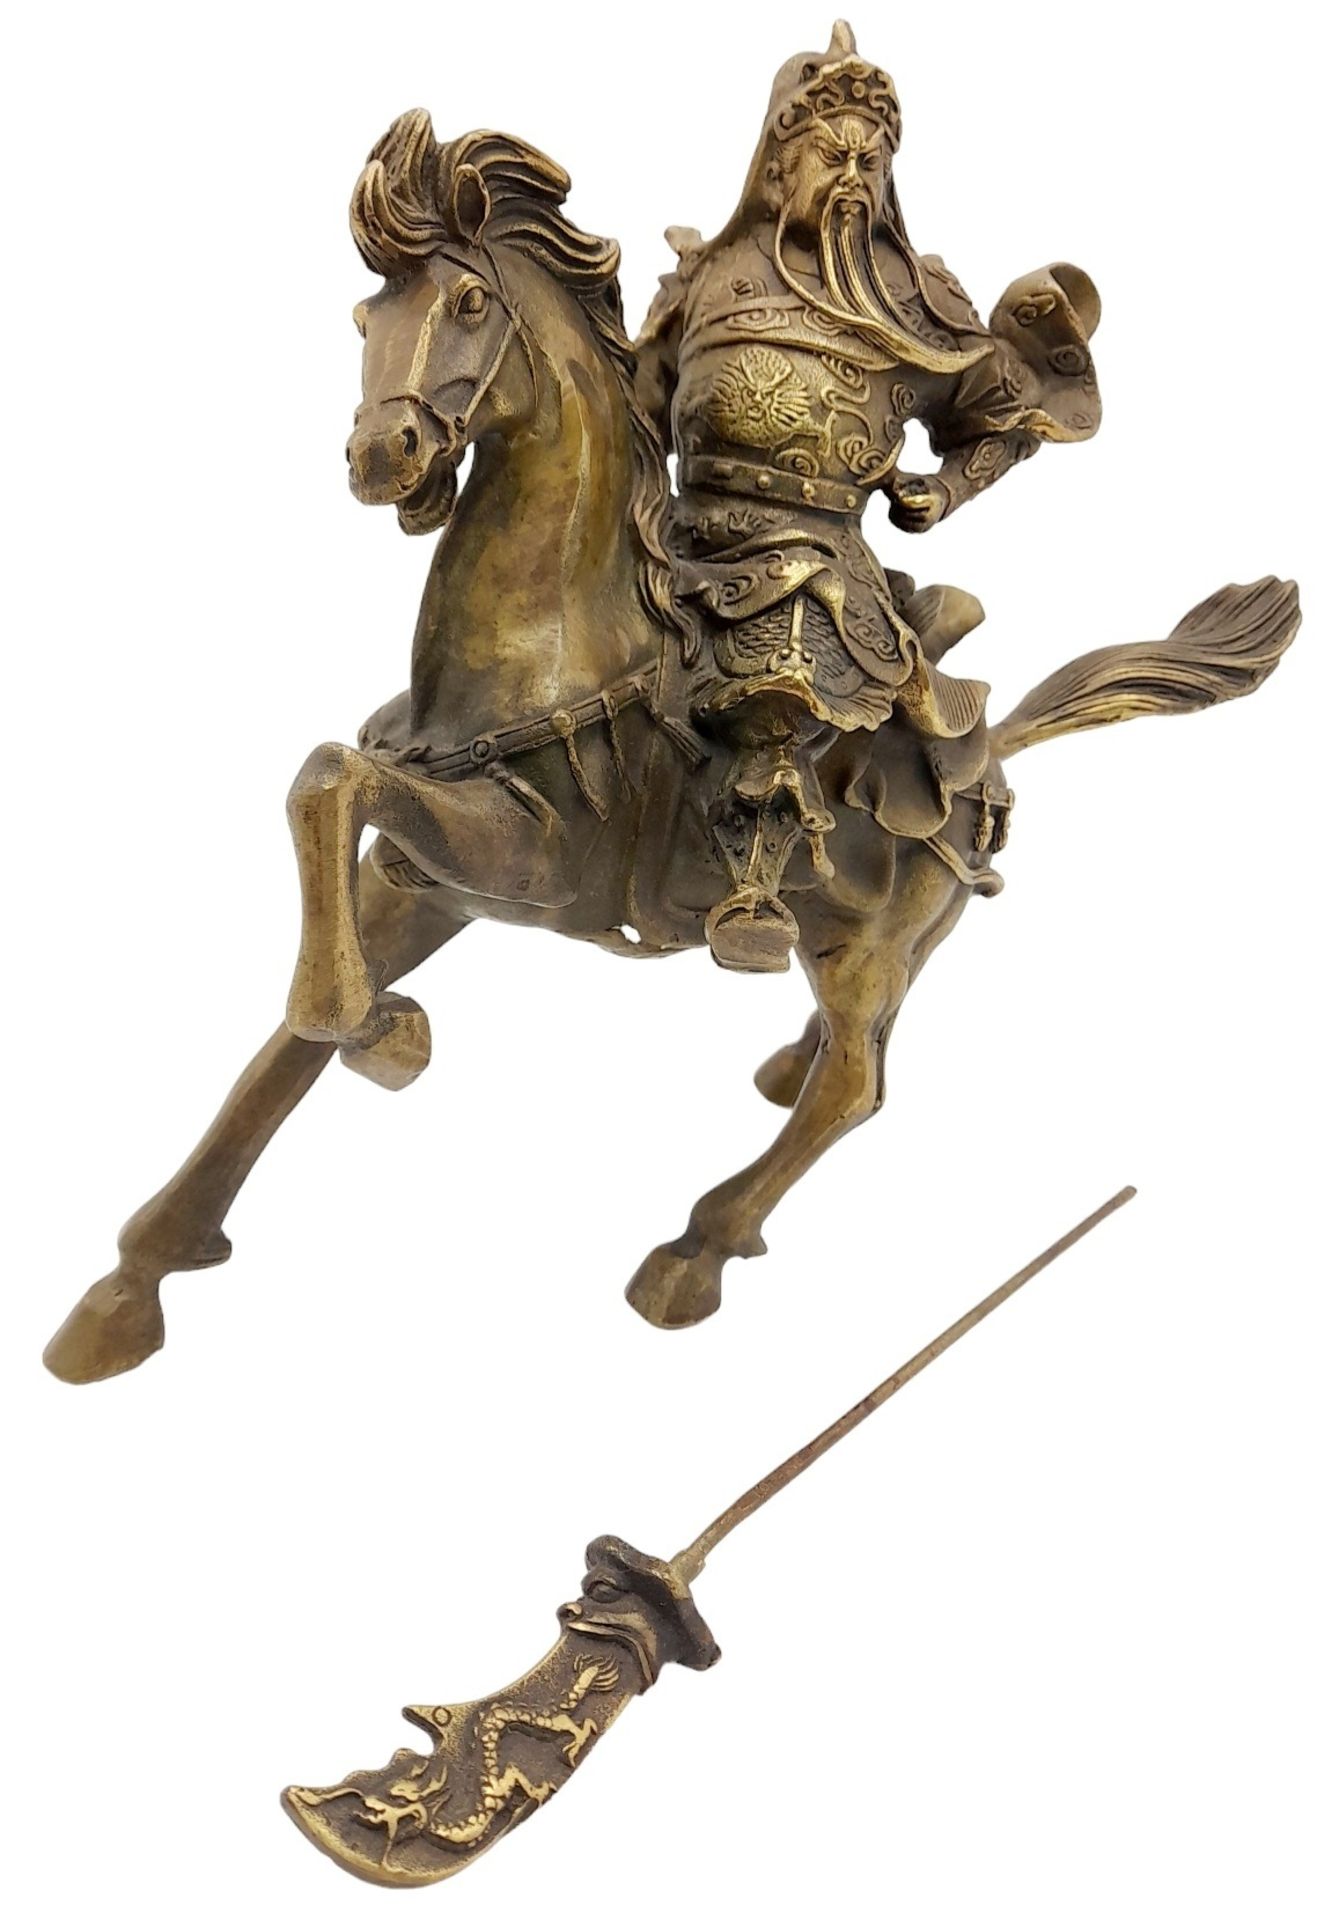 A Vintage Chinese Copper Guan Gong (God of war and wealth) on Horseback Statue. 23cm x 19cm tall. - Bild 5 aus 6